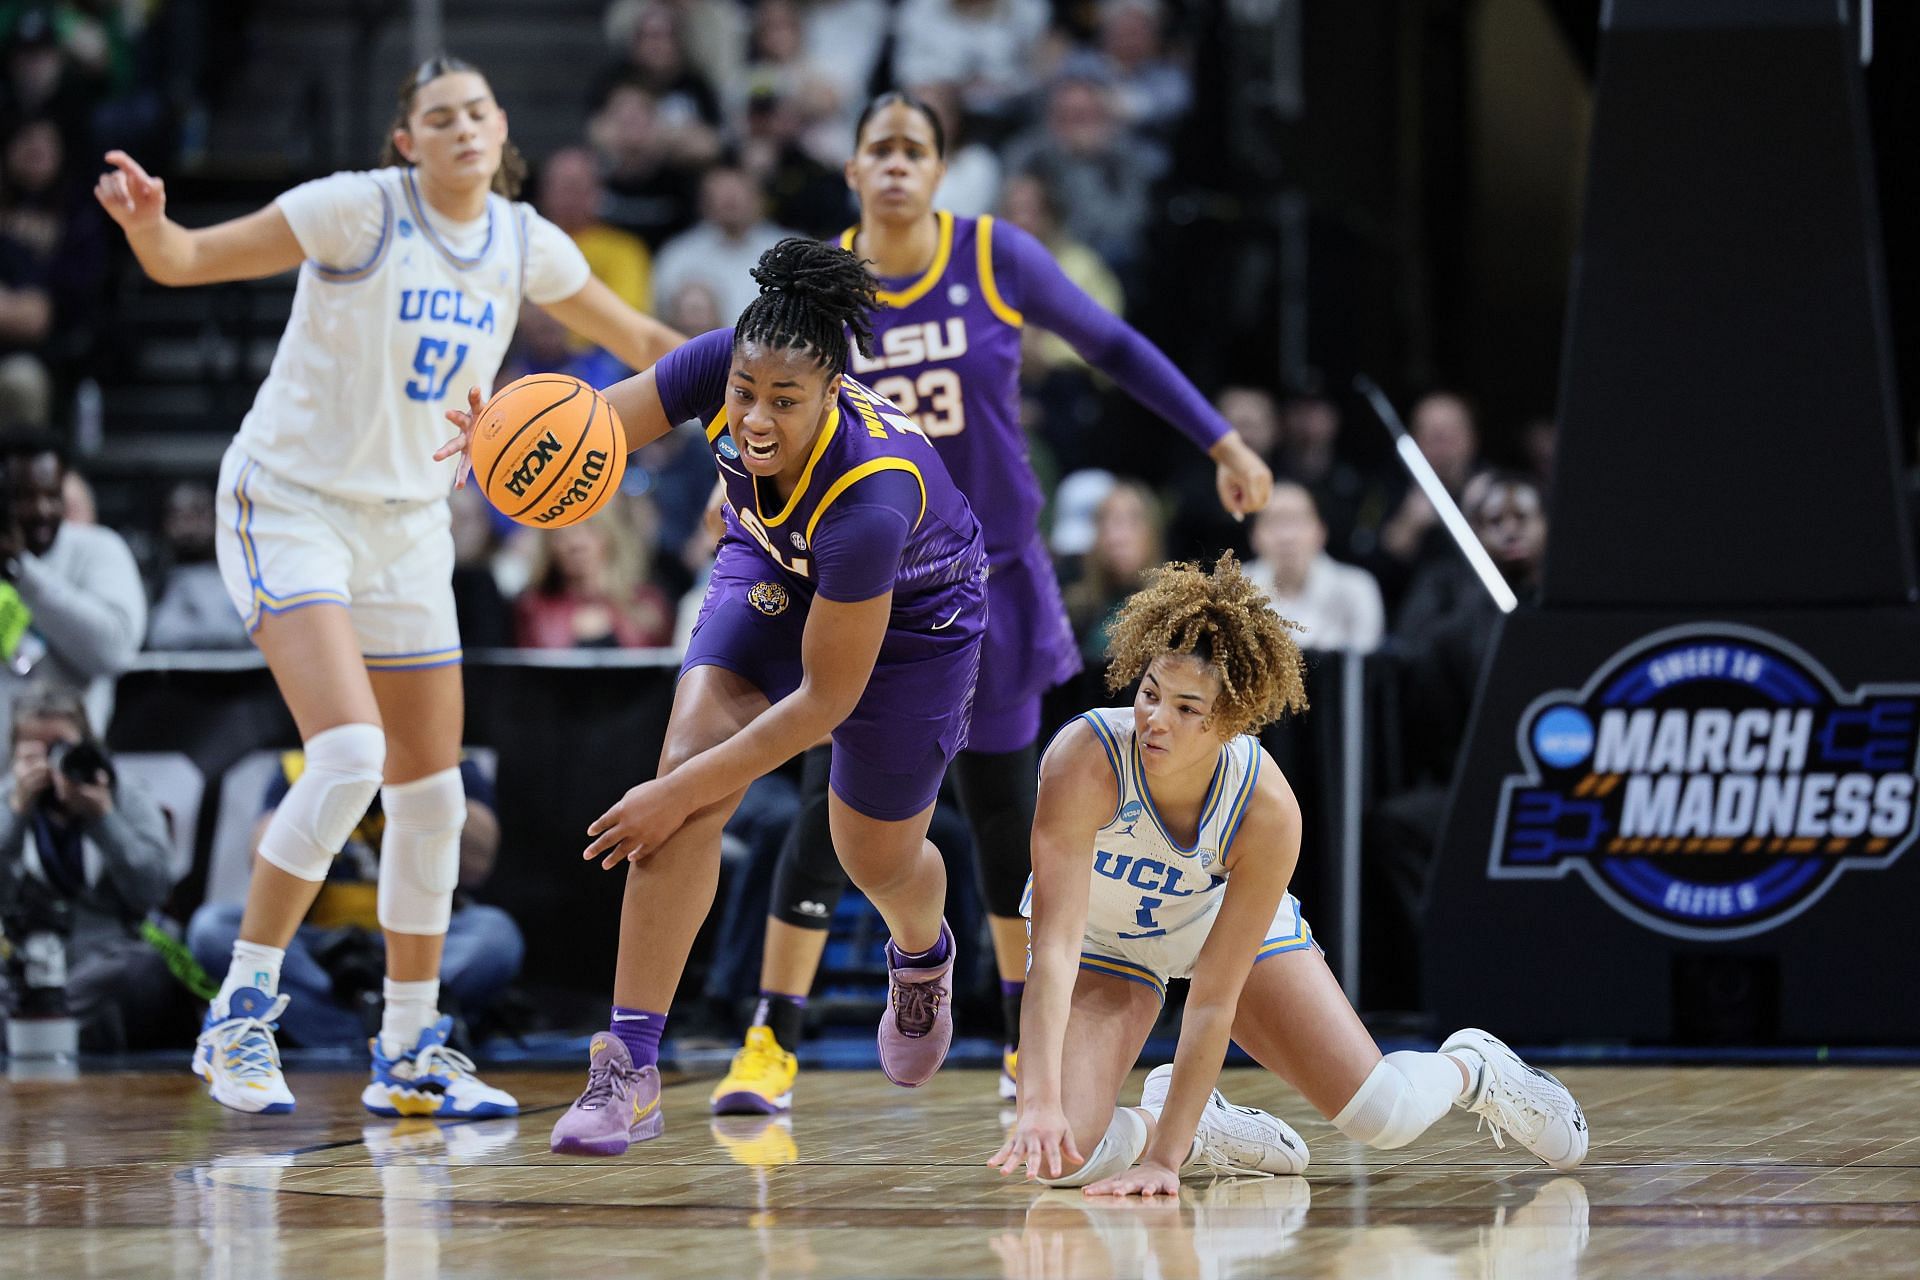 Mikaylah Williams averaged 14.5 points, 4.9 rebounds, 2.9 assists and 1.2 steals per contest for LSU.